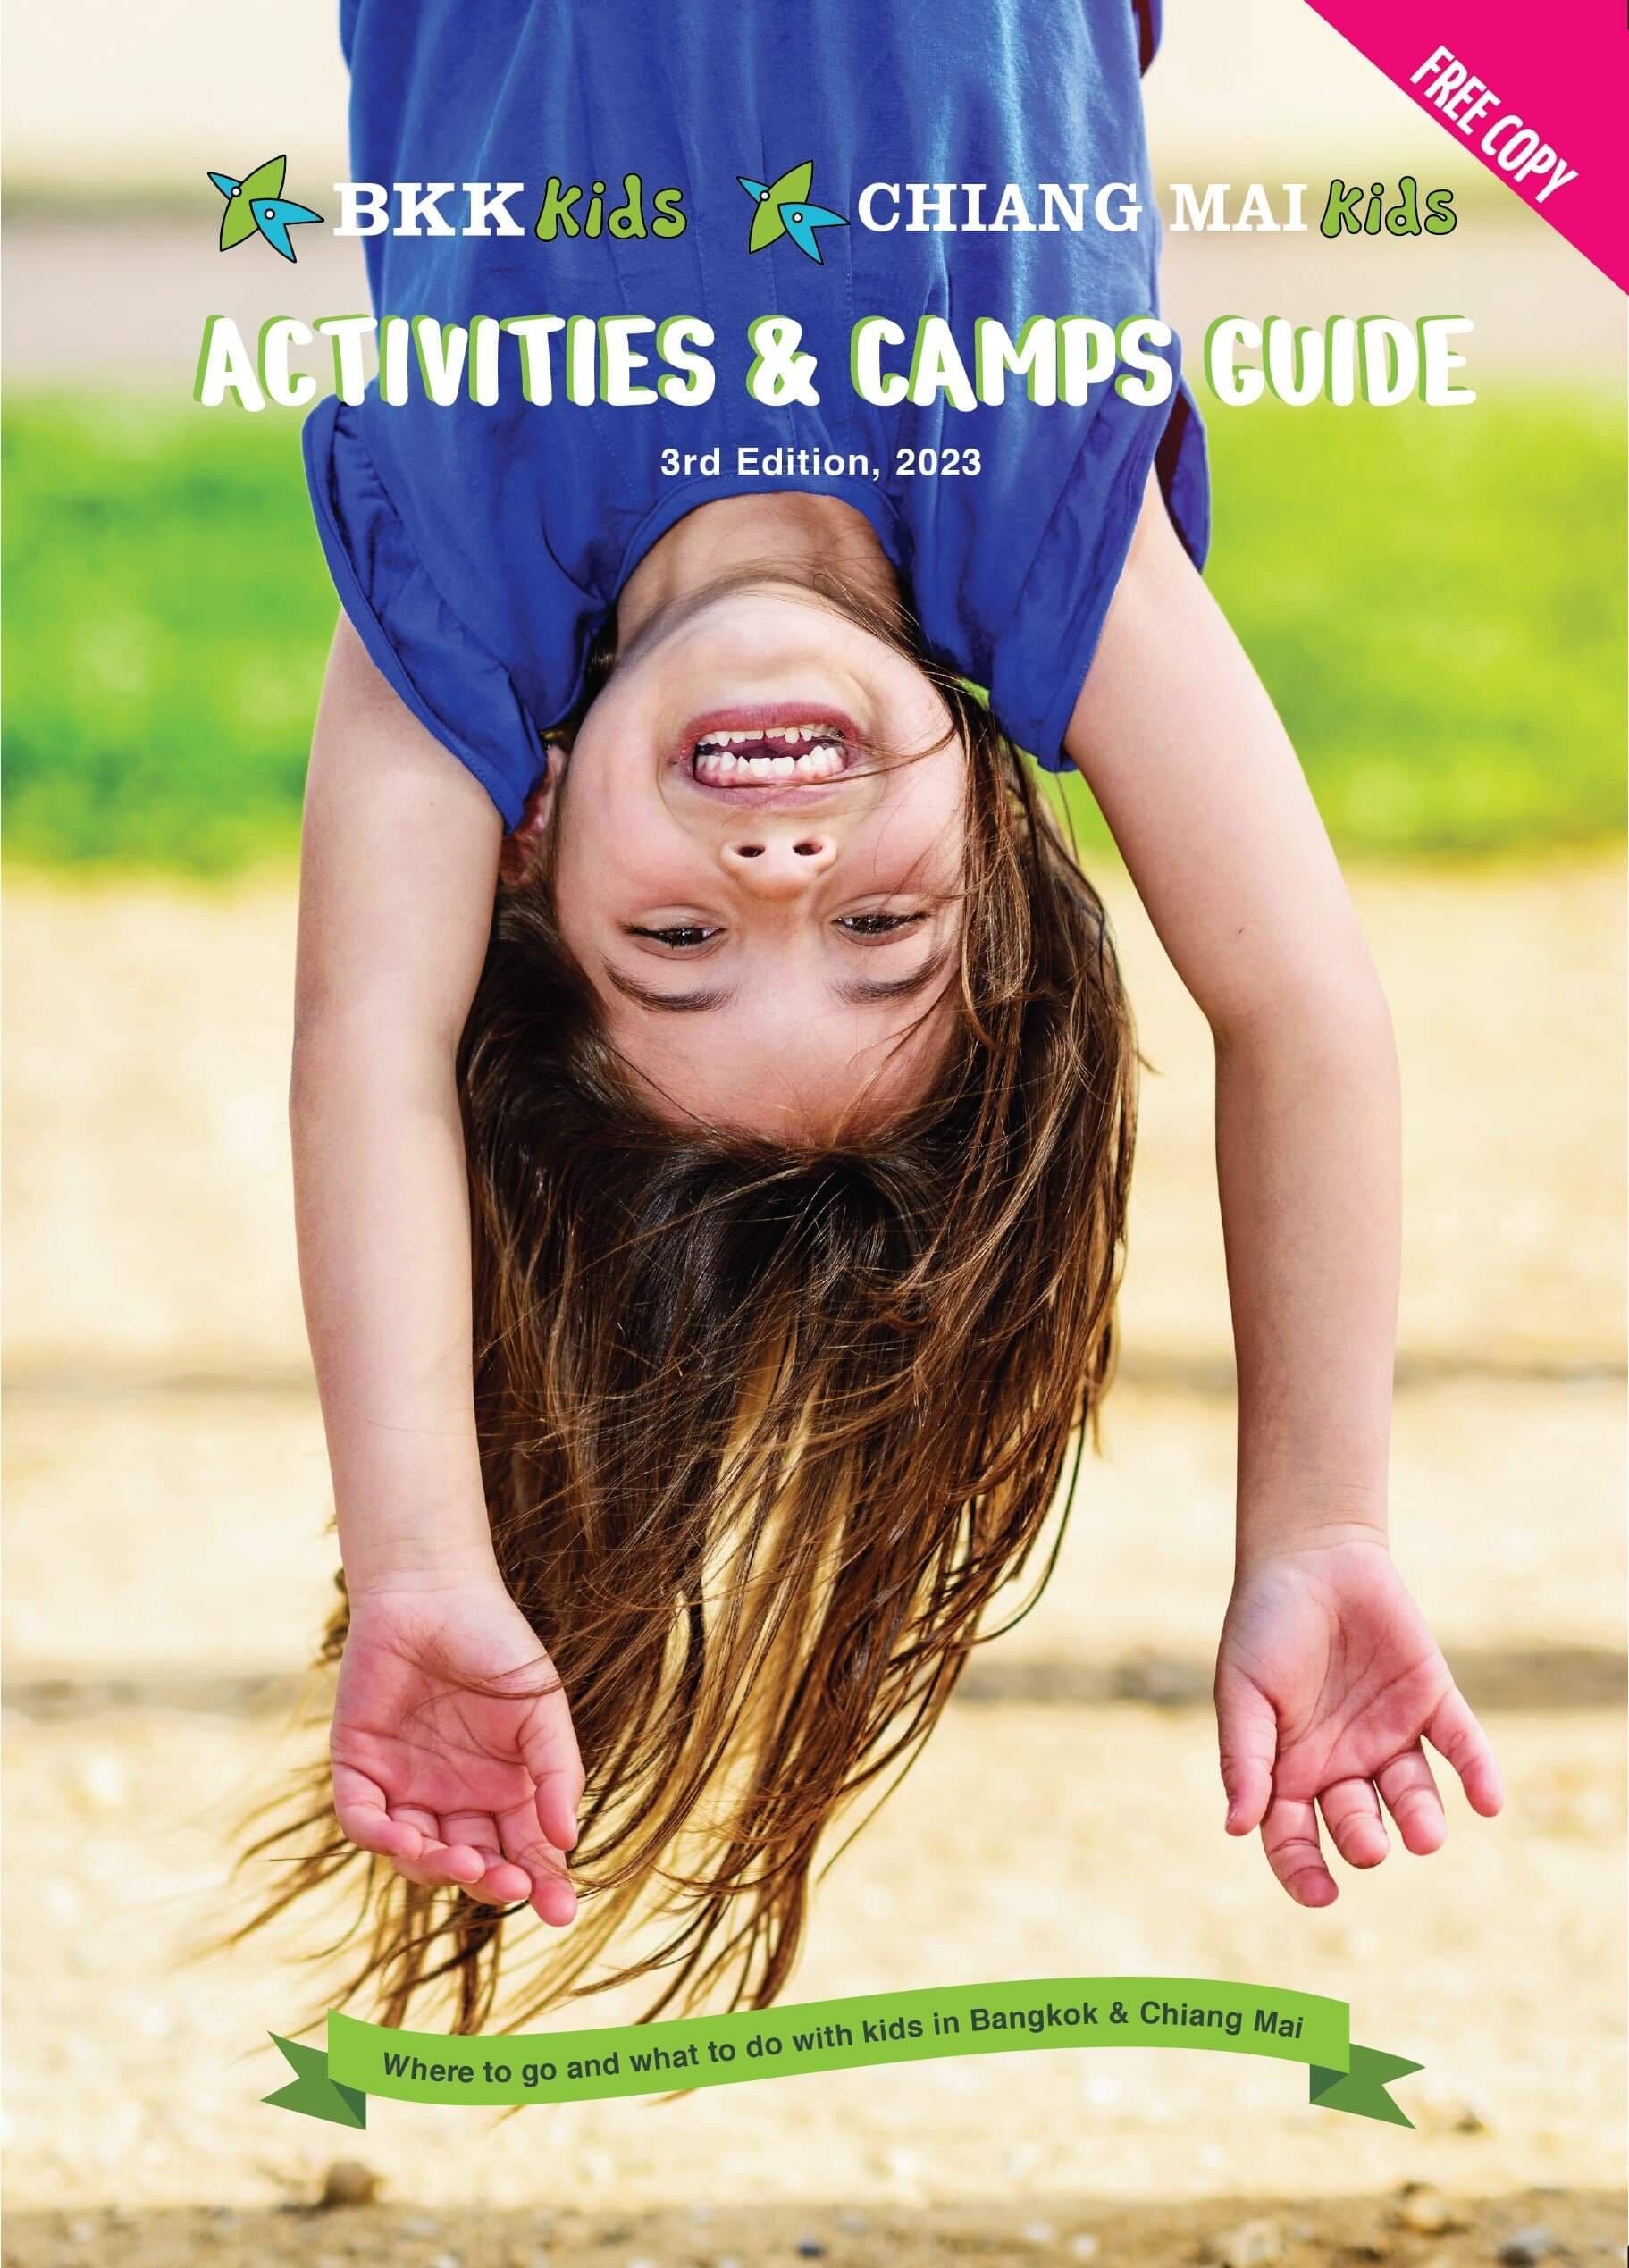 2023 Activities and Camps Guide from Bkk Kids